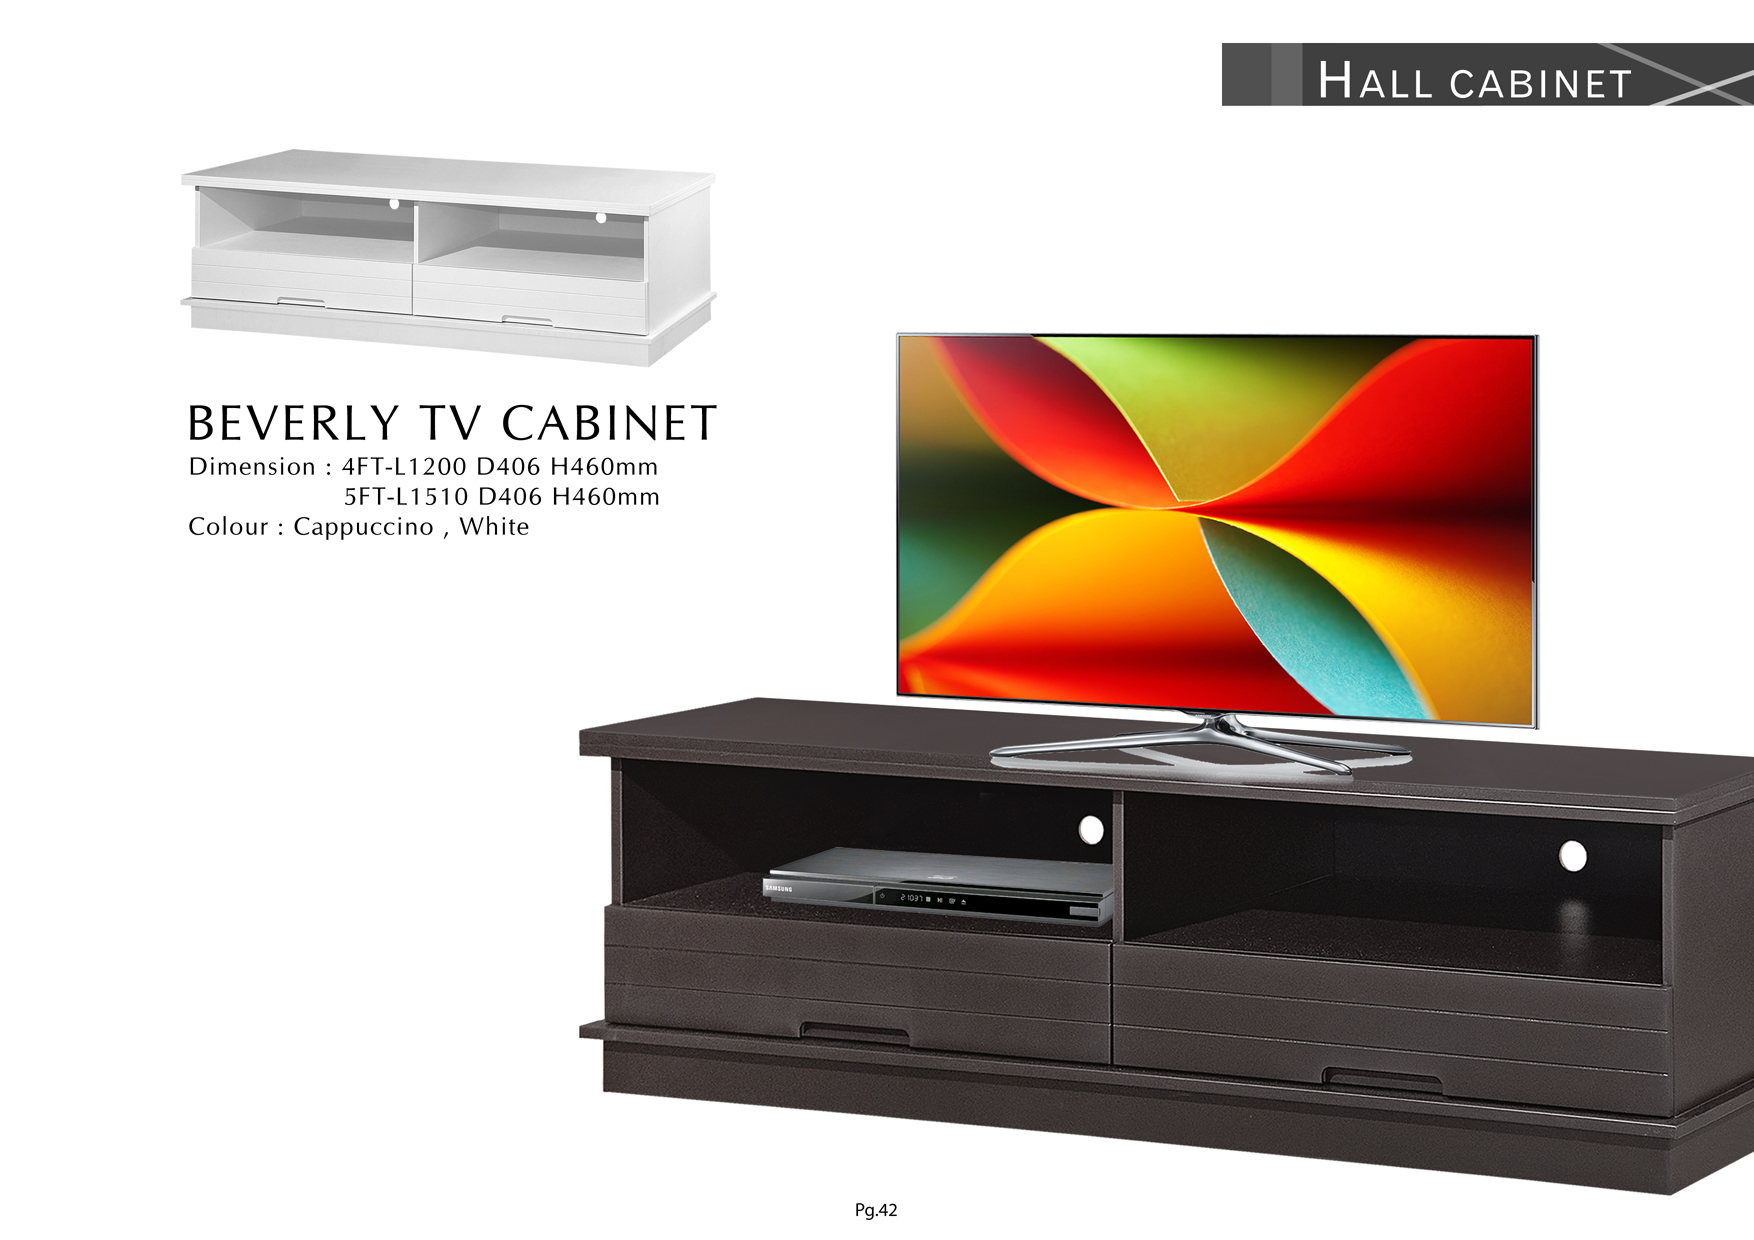 Product: PG42. BEVERLY TV CABINET